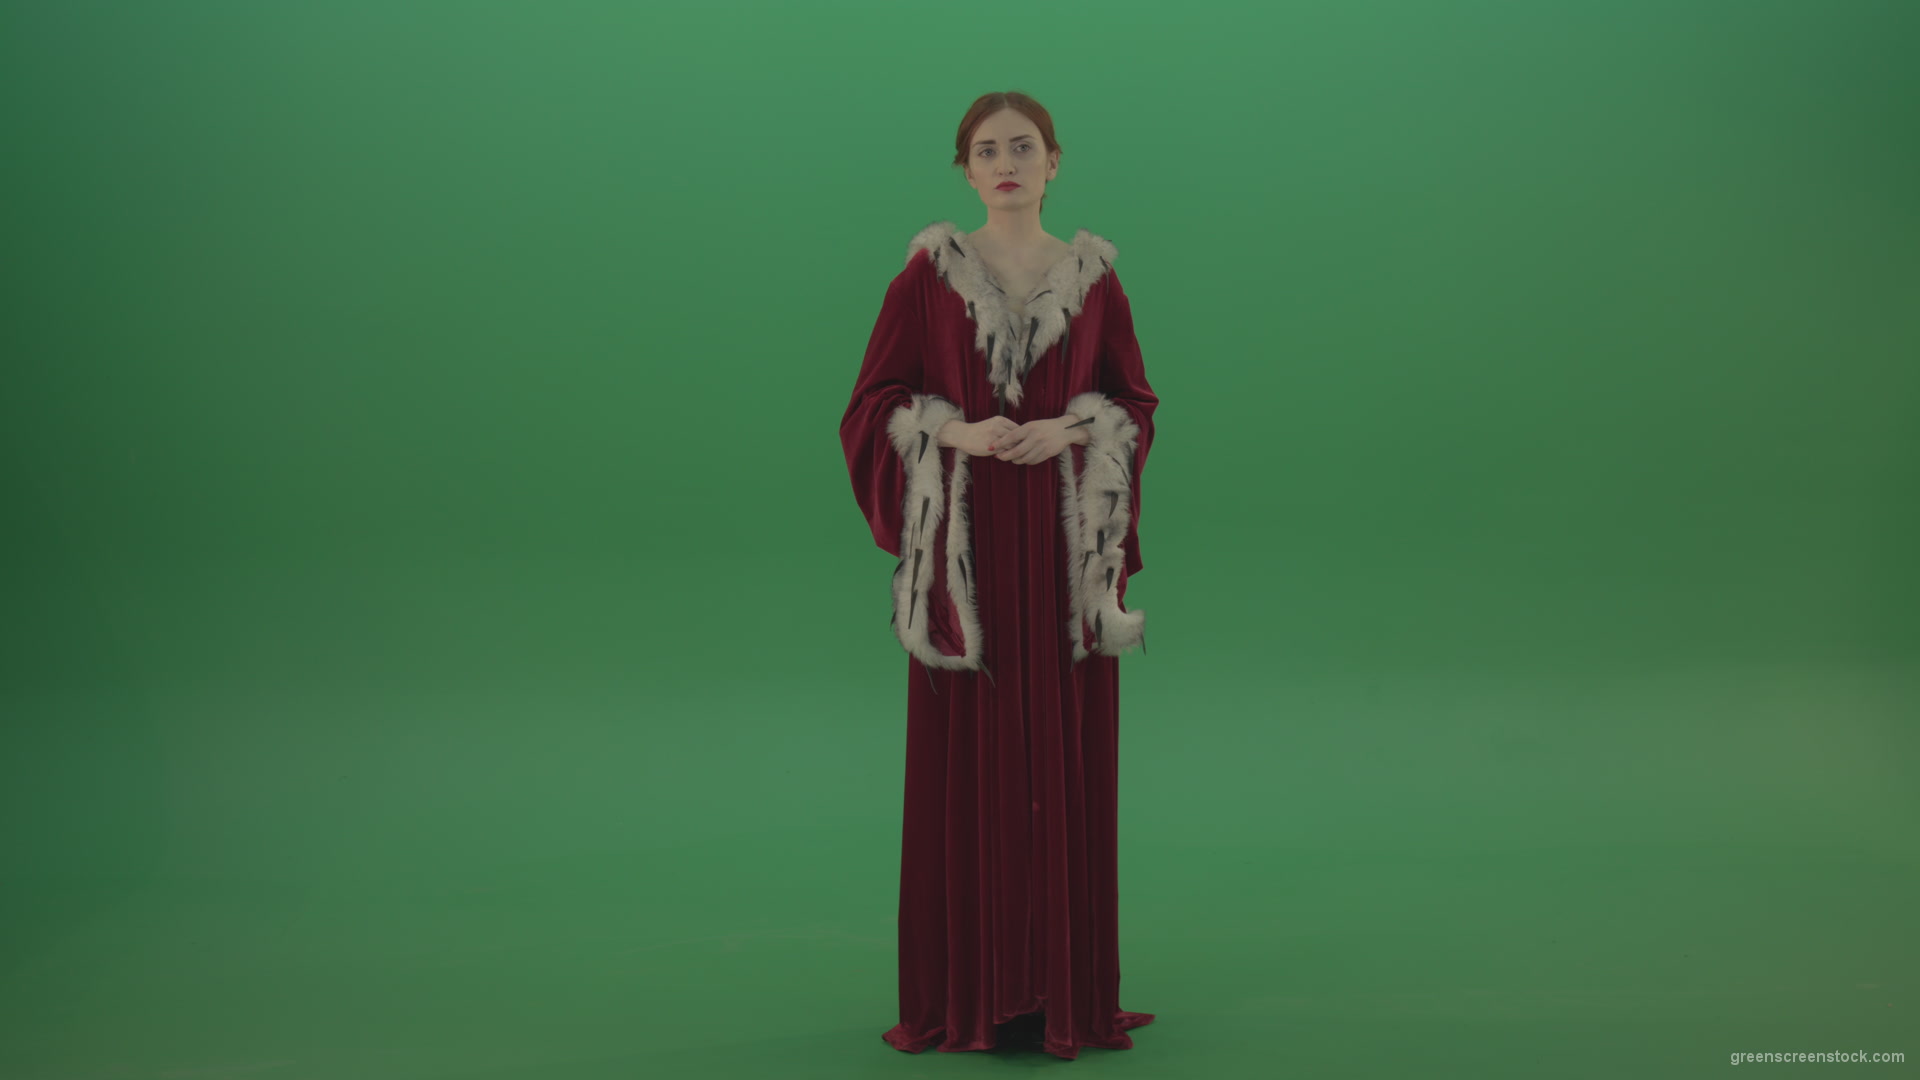 Young-actress-dressed-in-royal-dress-showing-different-scenes_001 Green Screen Stock